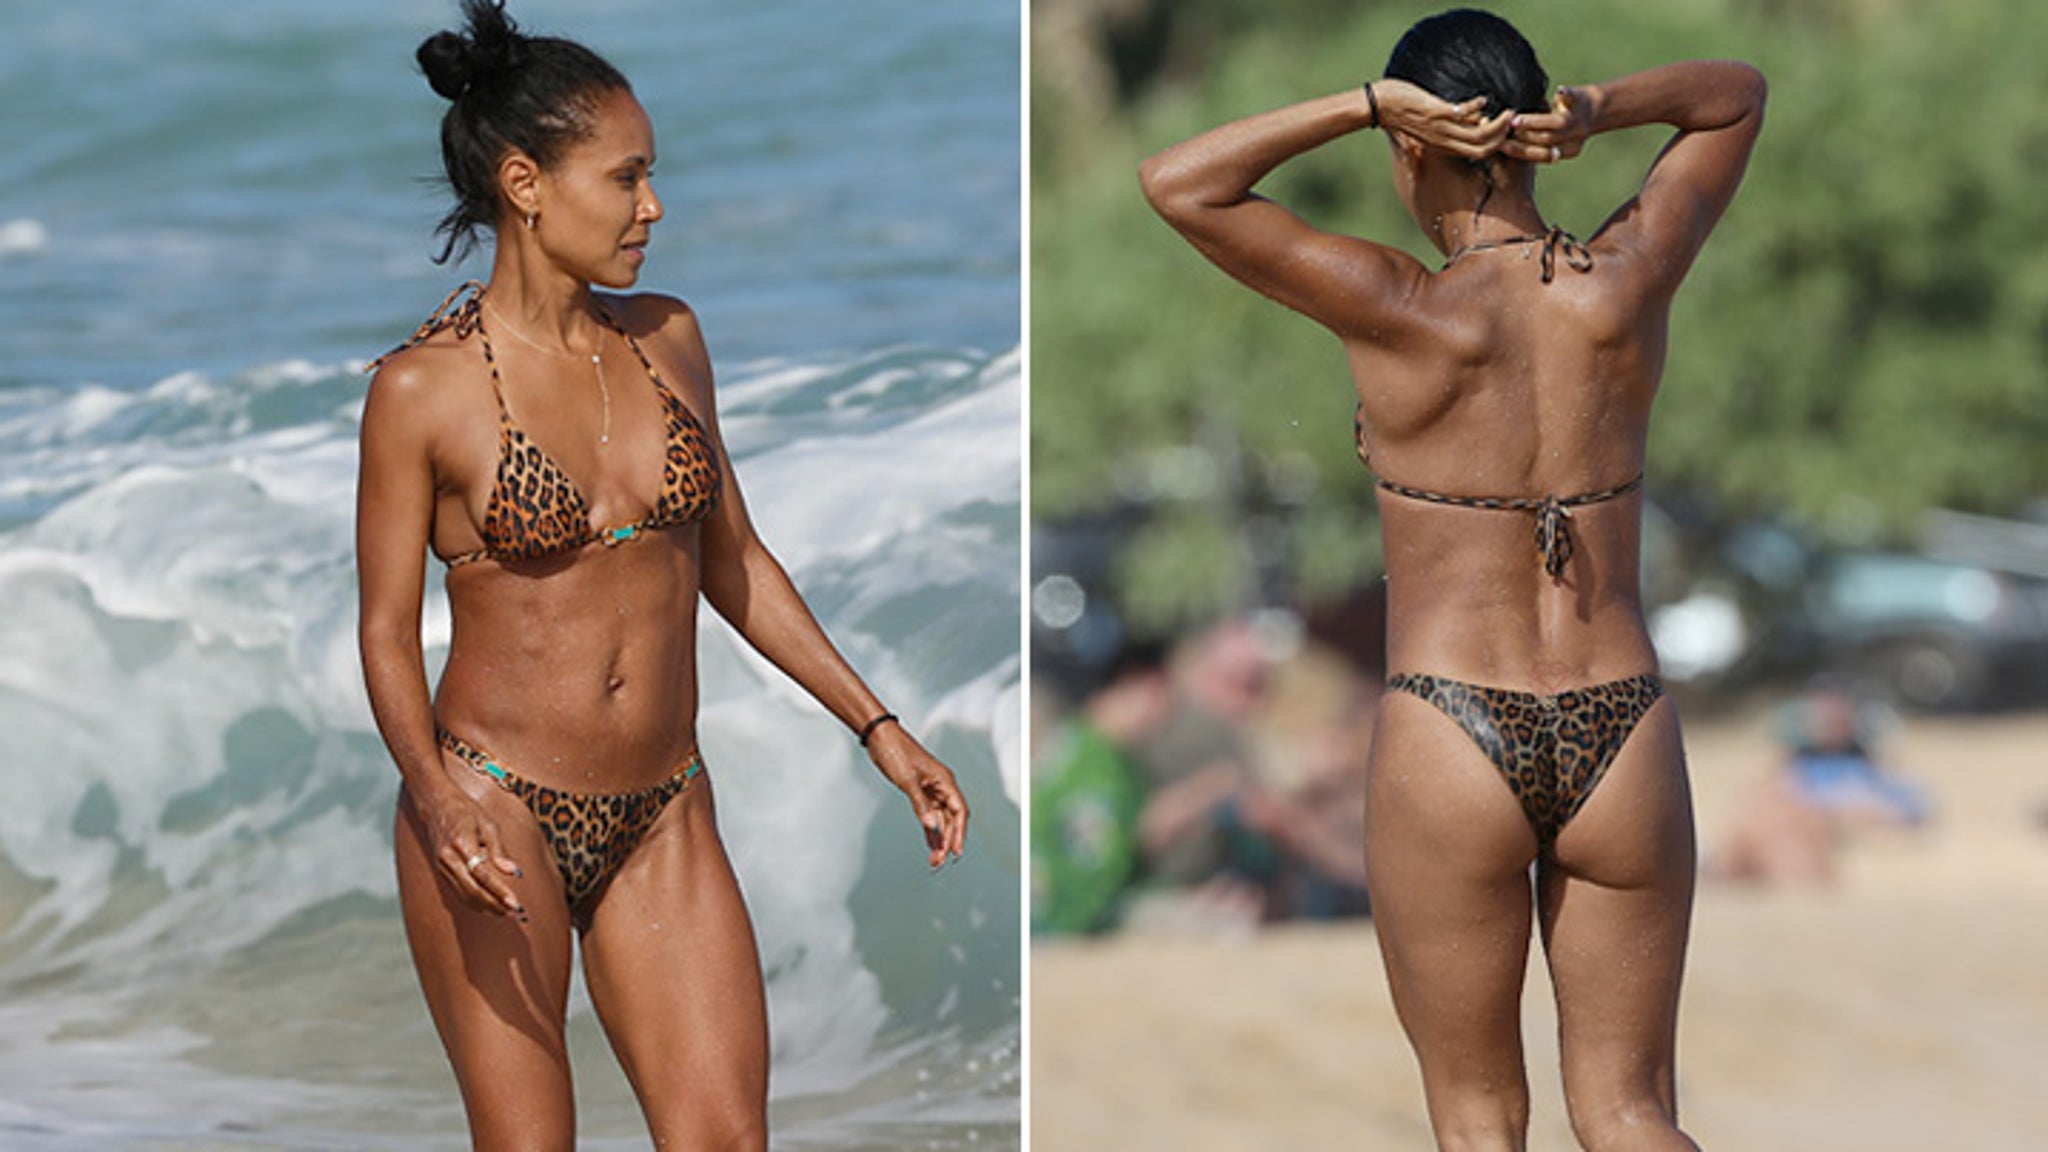 Jada Pinkett Smith's Butt Easily Spotted in Hawaii (PHOTO GALLERY) .